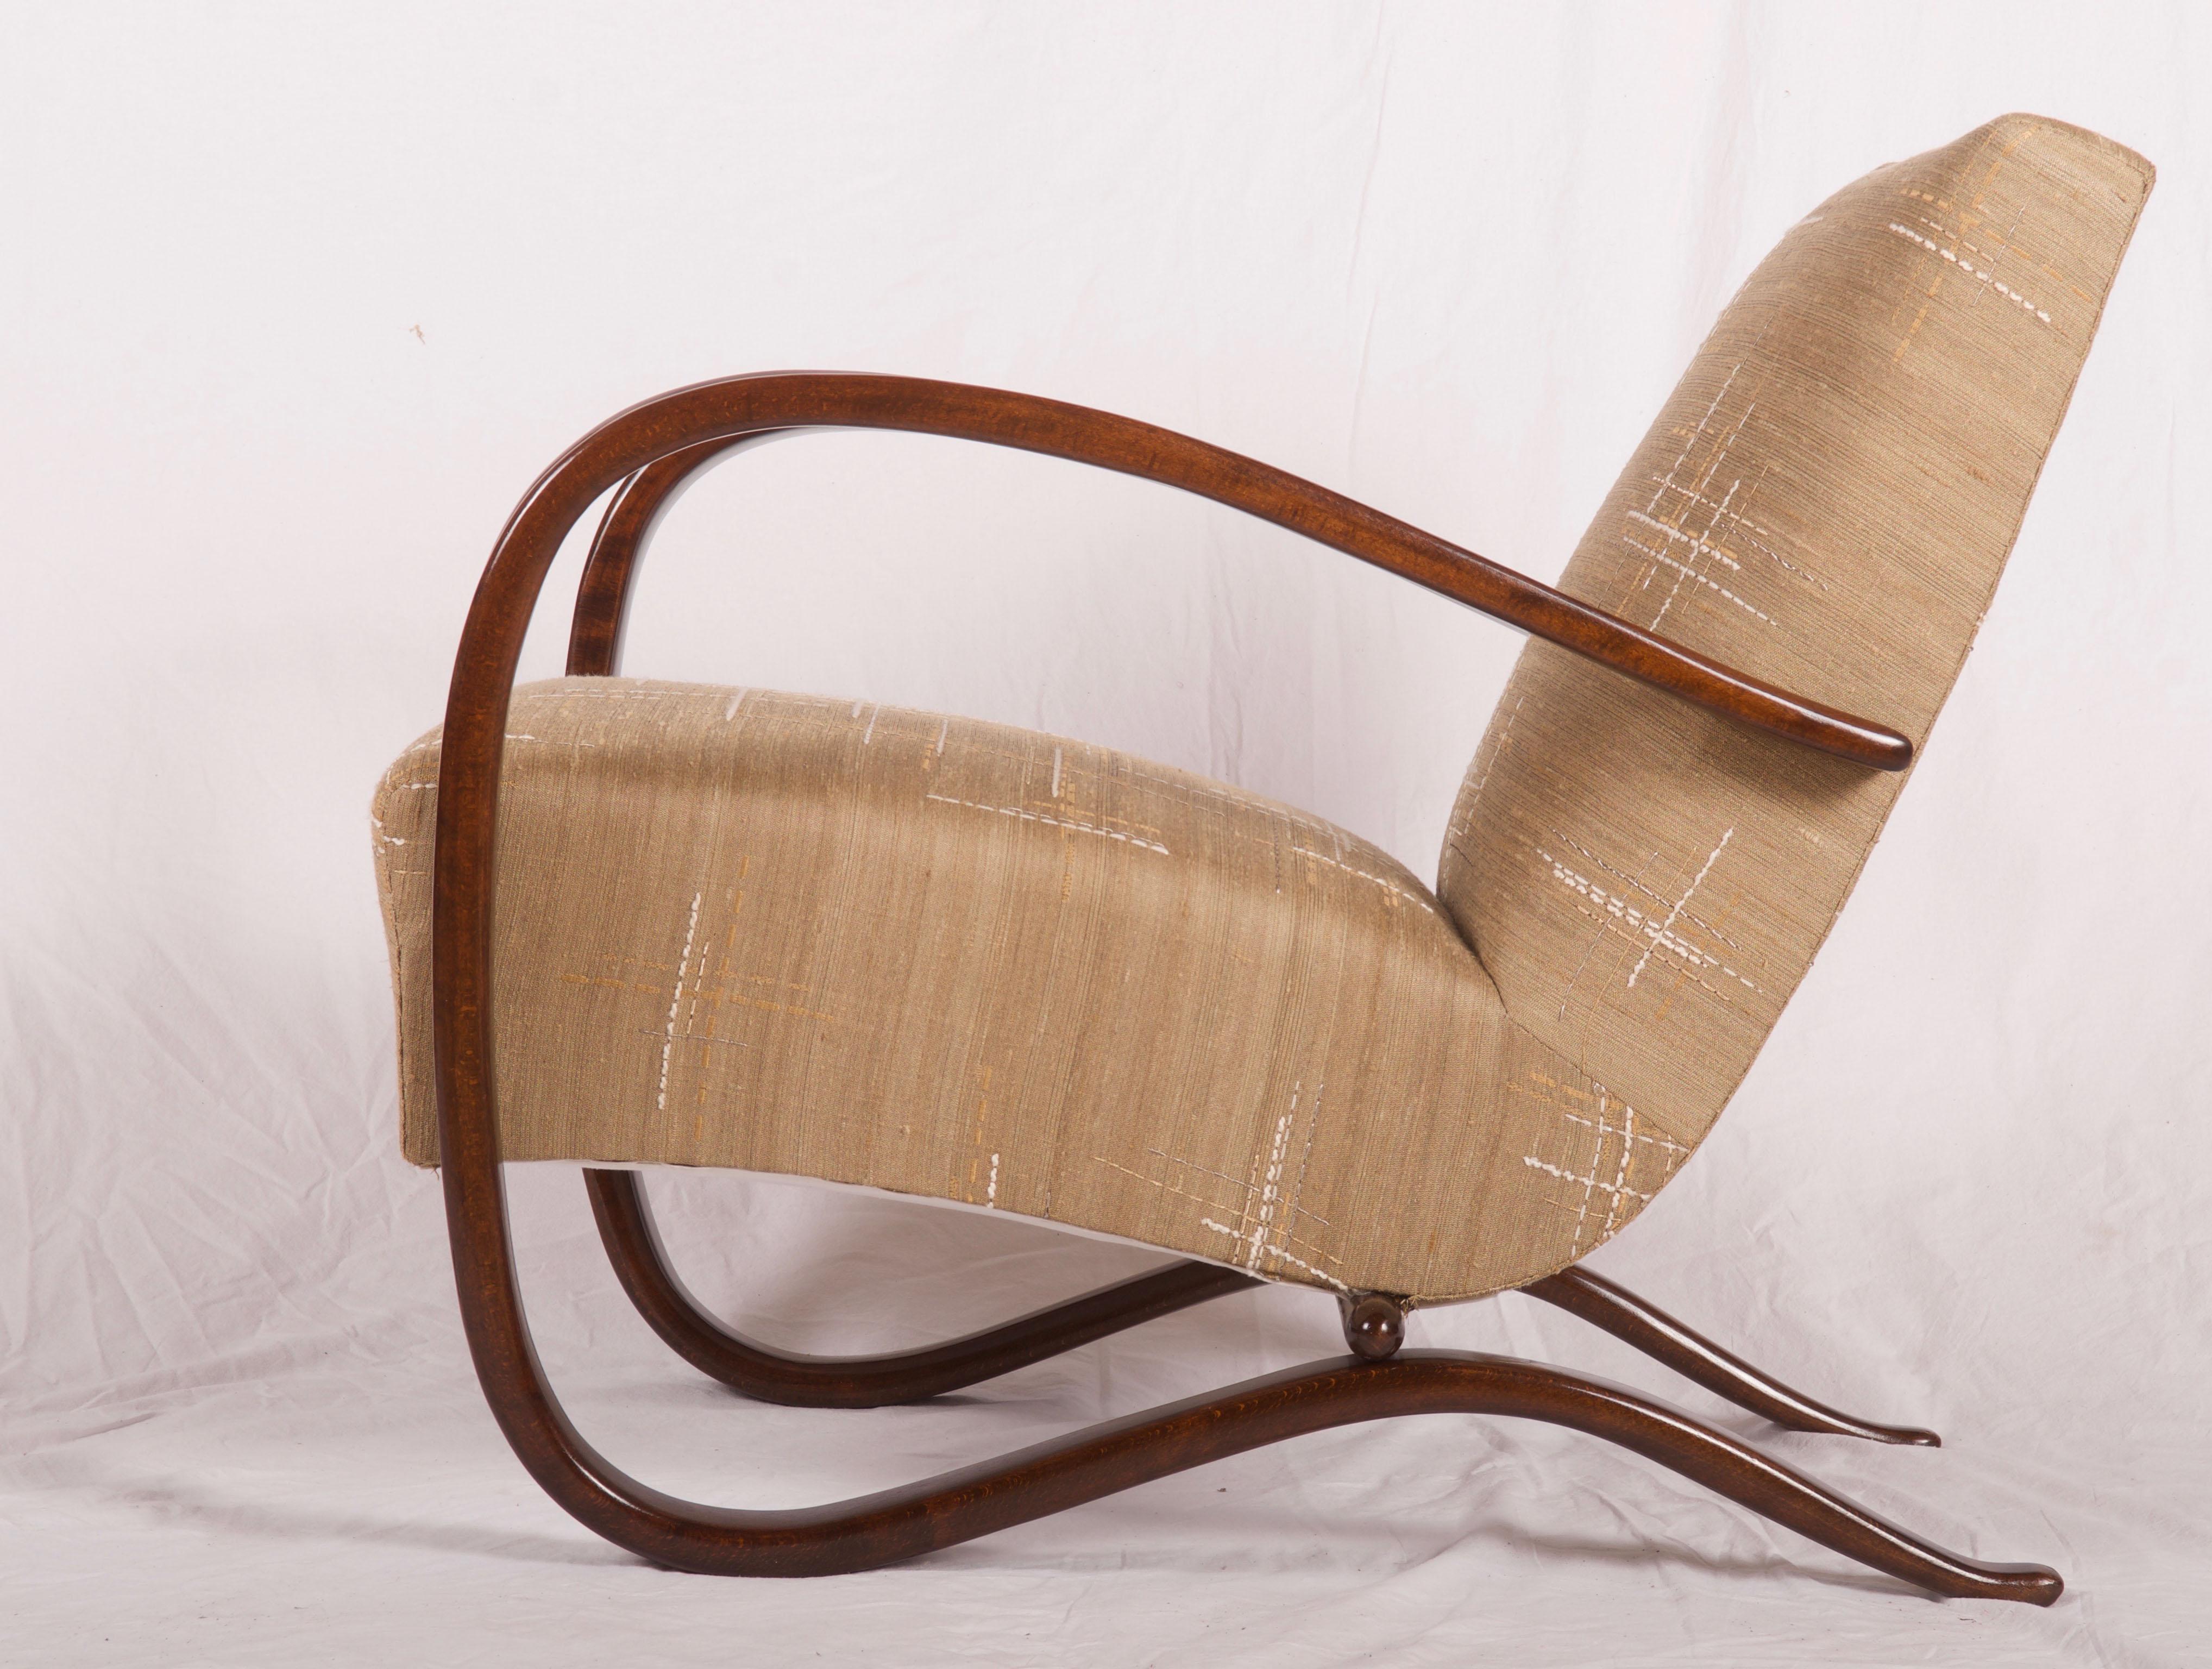 Beech bentwood walnut stained armchair made by Thonet in the 1930s.
Excellent restored with seat springs upholstered with Dedar silk fabric.
On request several available
Delivery time about 3-4 weeks.
Price per chair.